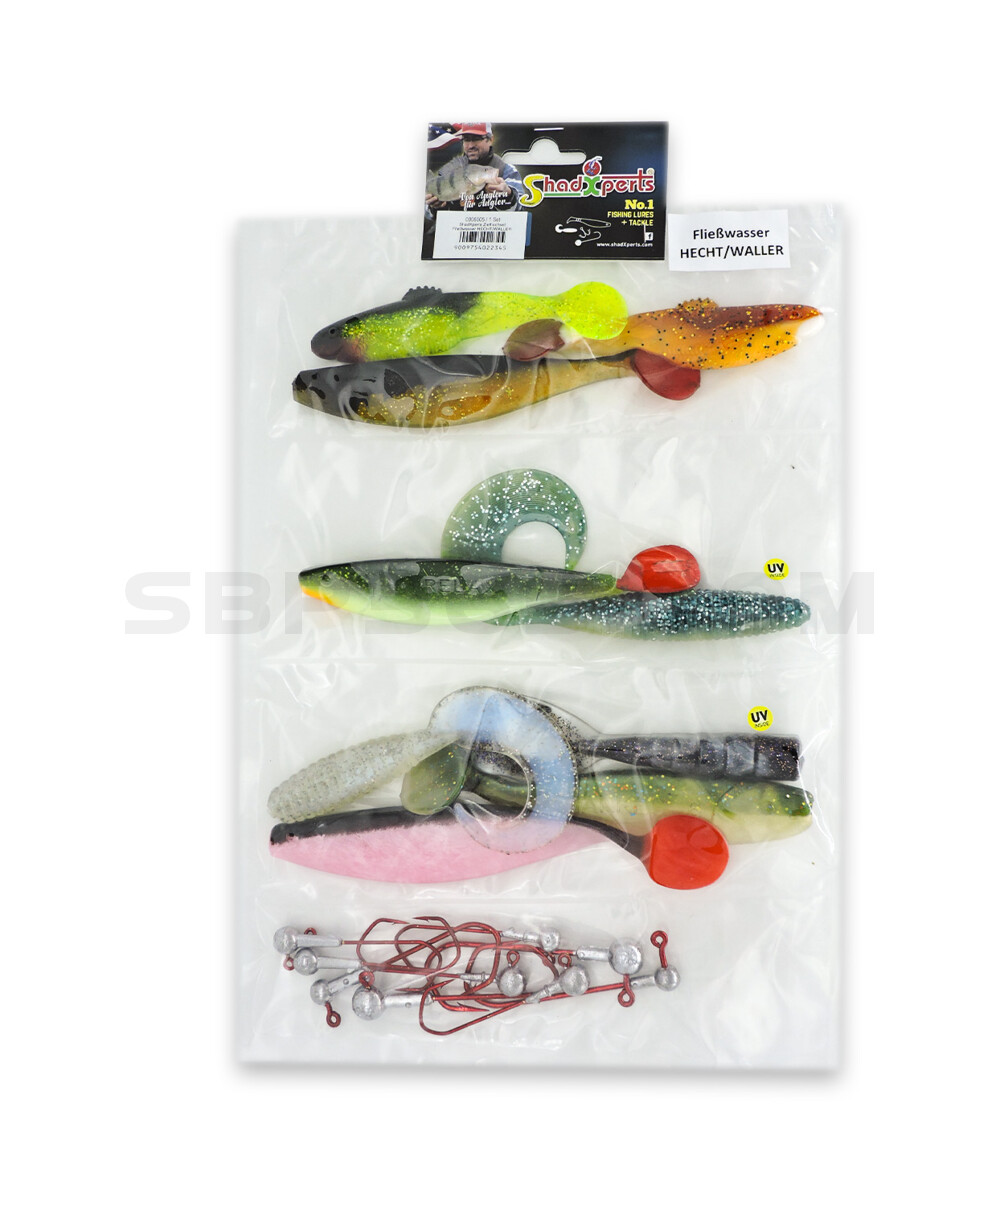 ShadXperts target fish set current water pike/catfish - ca. 10 shads/8 jigs